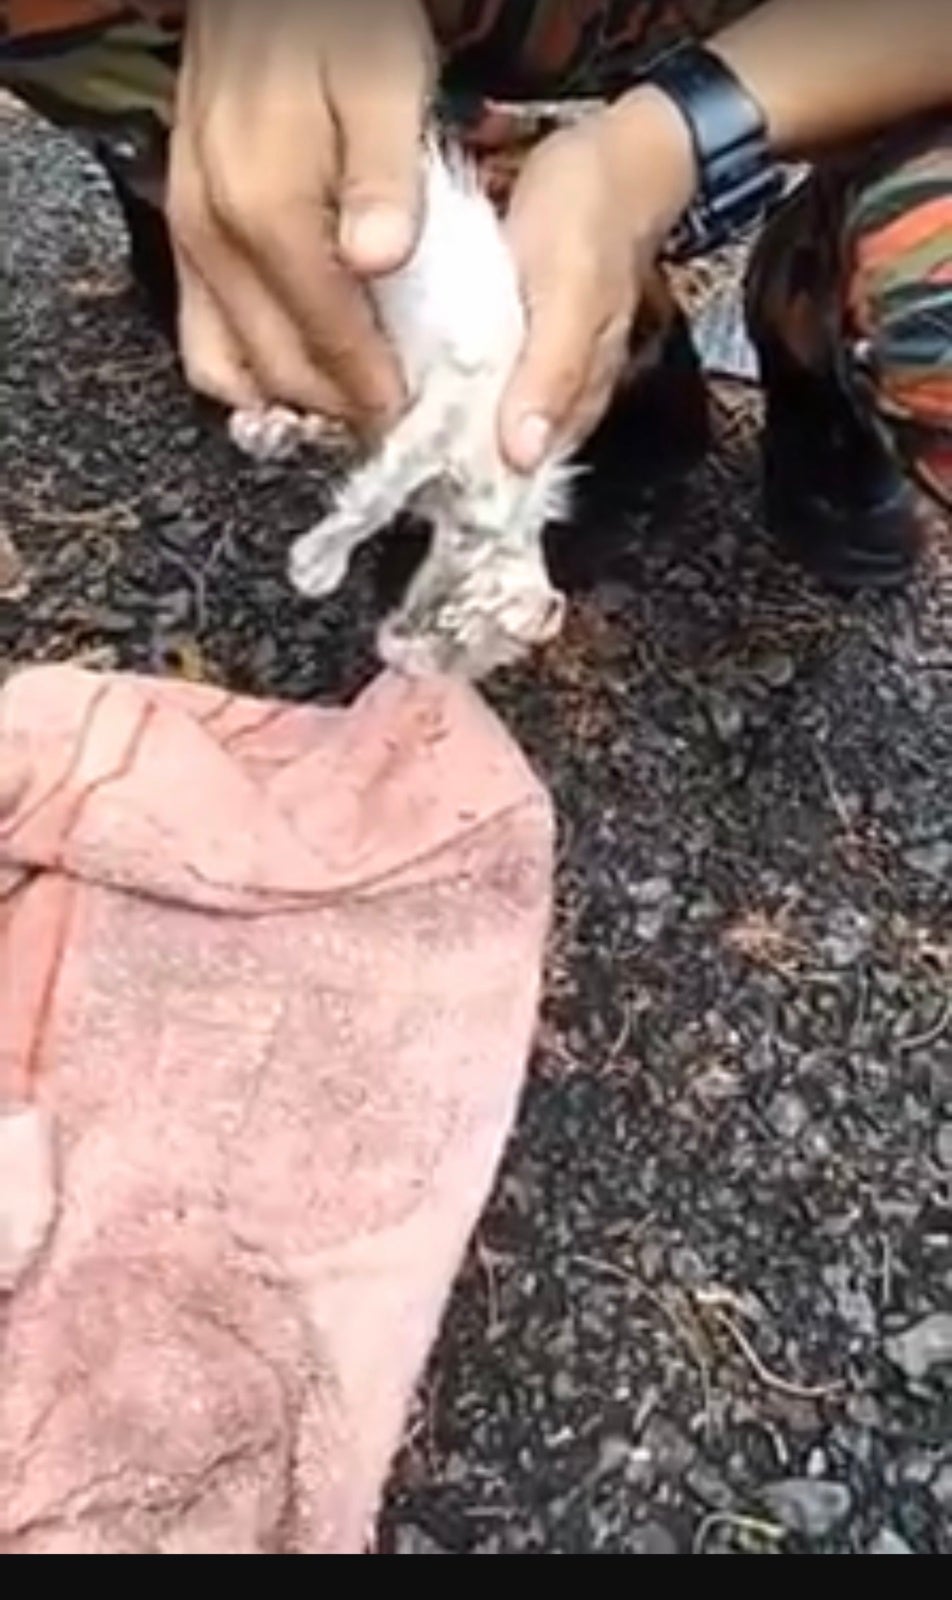 Kedah Firefighter Goes Viral After Resurrecting Drowning Kitten Back To Life in Disastrous Lekima Thunderstorm - WORLD OF BUZZ 1